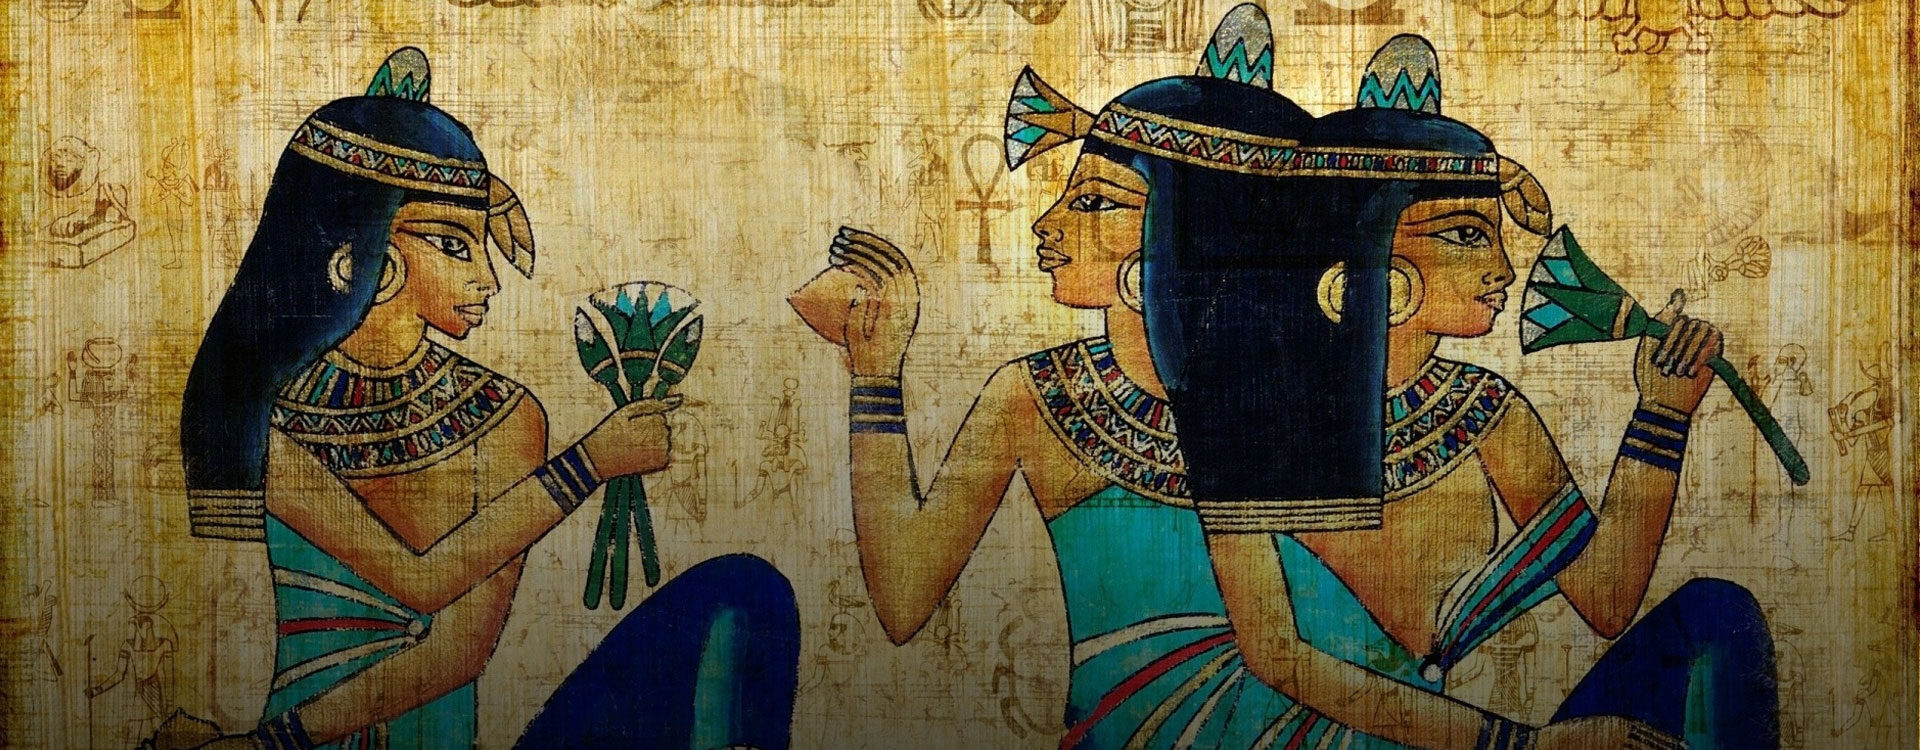 Egypt Art And Culture Discover The Art And Culture Of Ancient Egypt